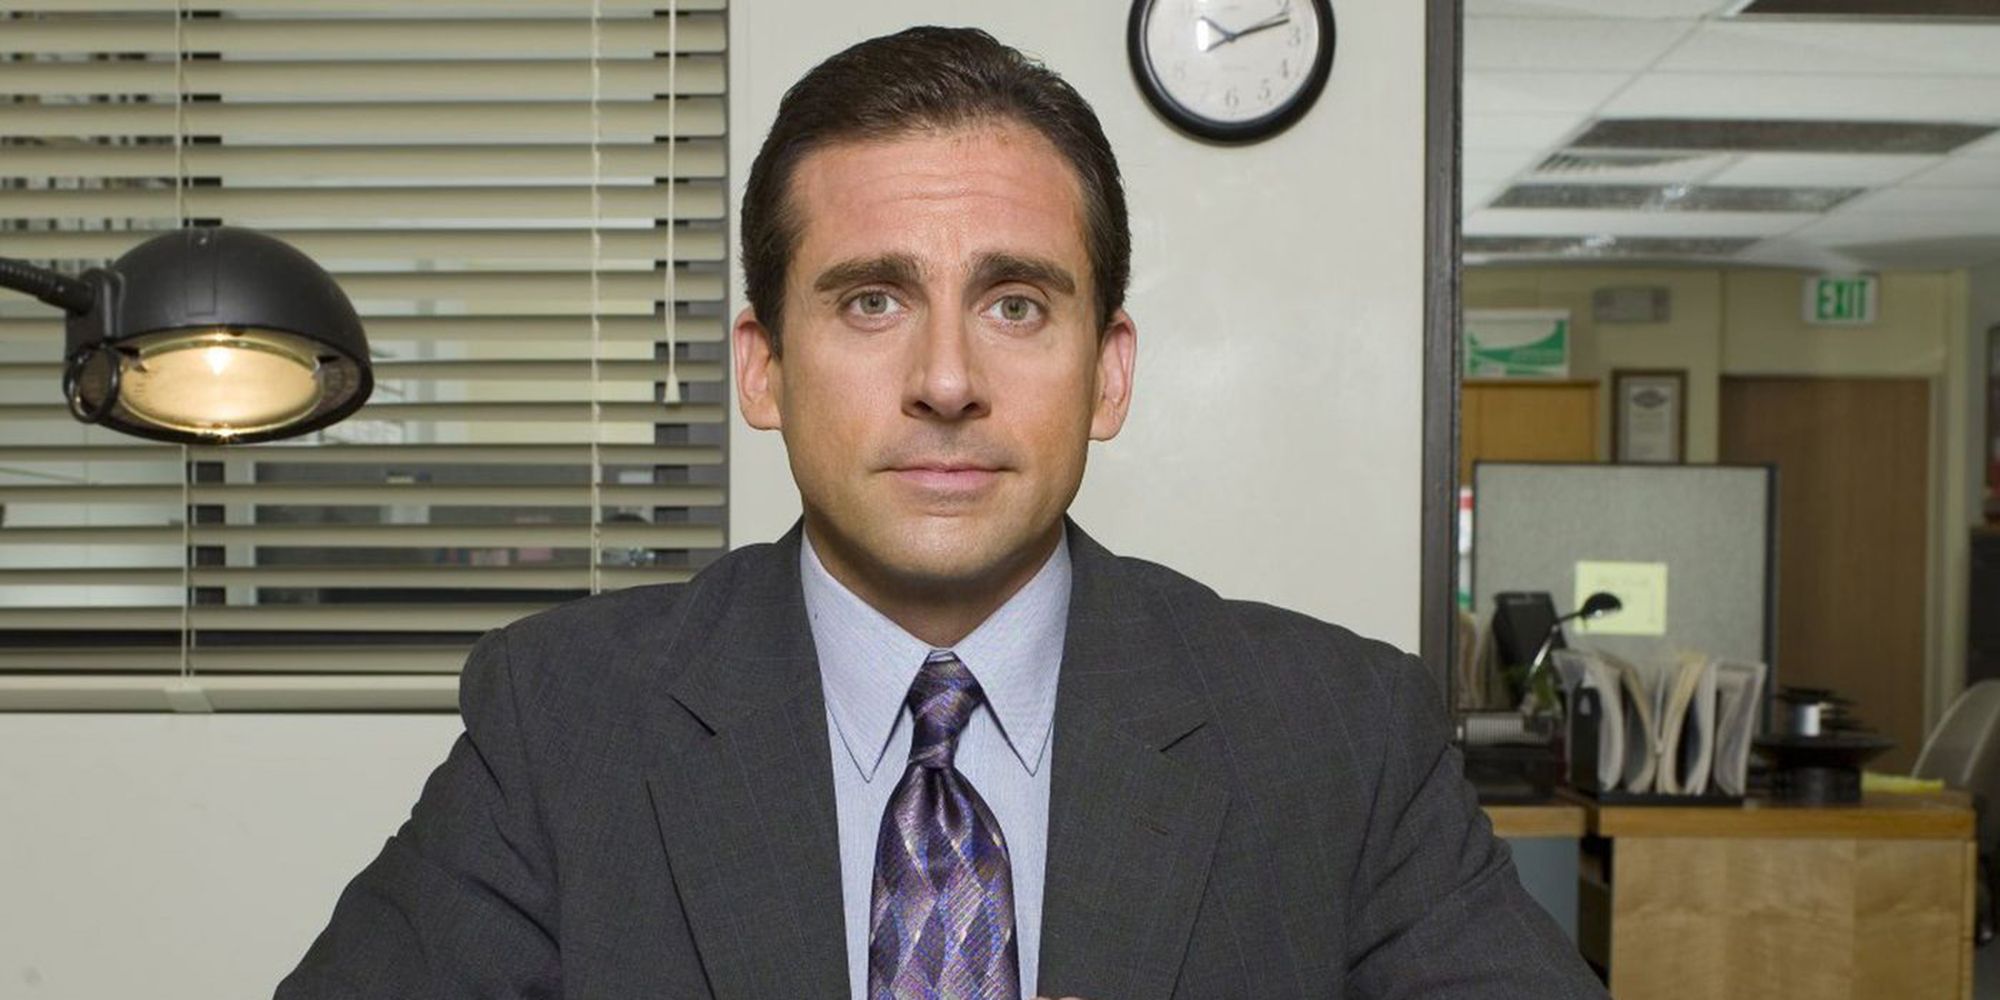 the office 2018 release date nbc